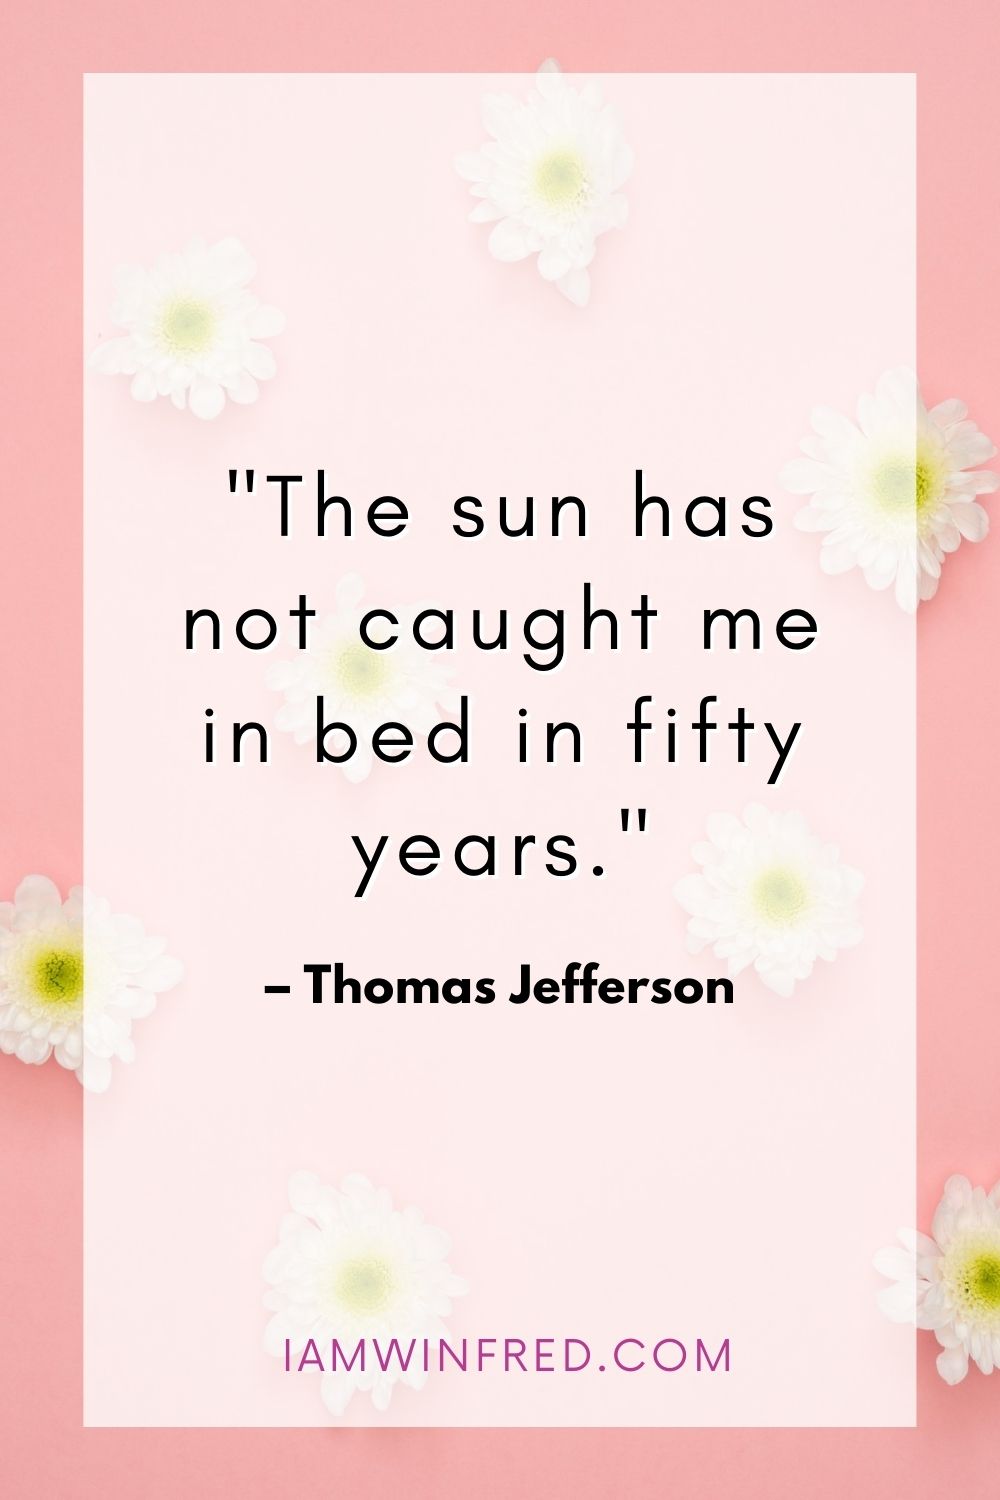 The Sun Has Not Caught Me In Bed In Fifty Years.